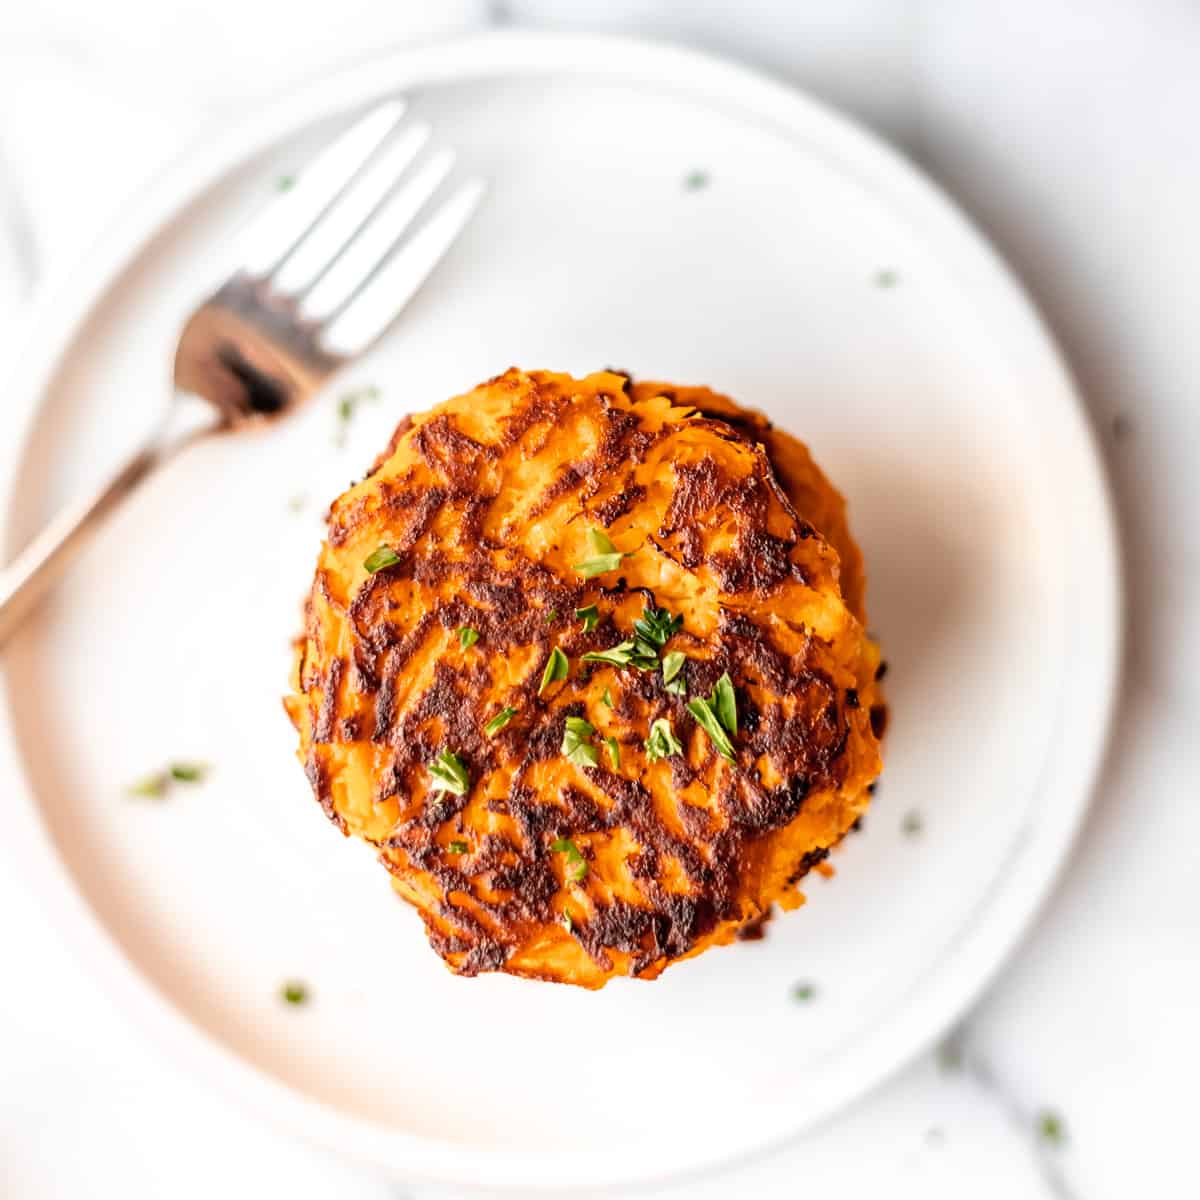 Sweet Potato Hash Browns - Easy Recipe with Shredded Sweet Potatoes